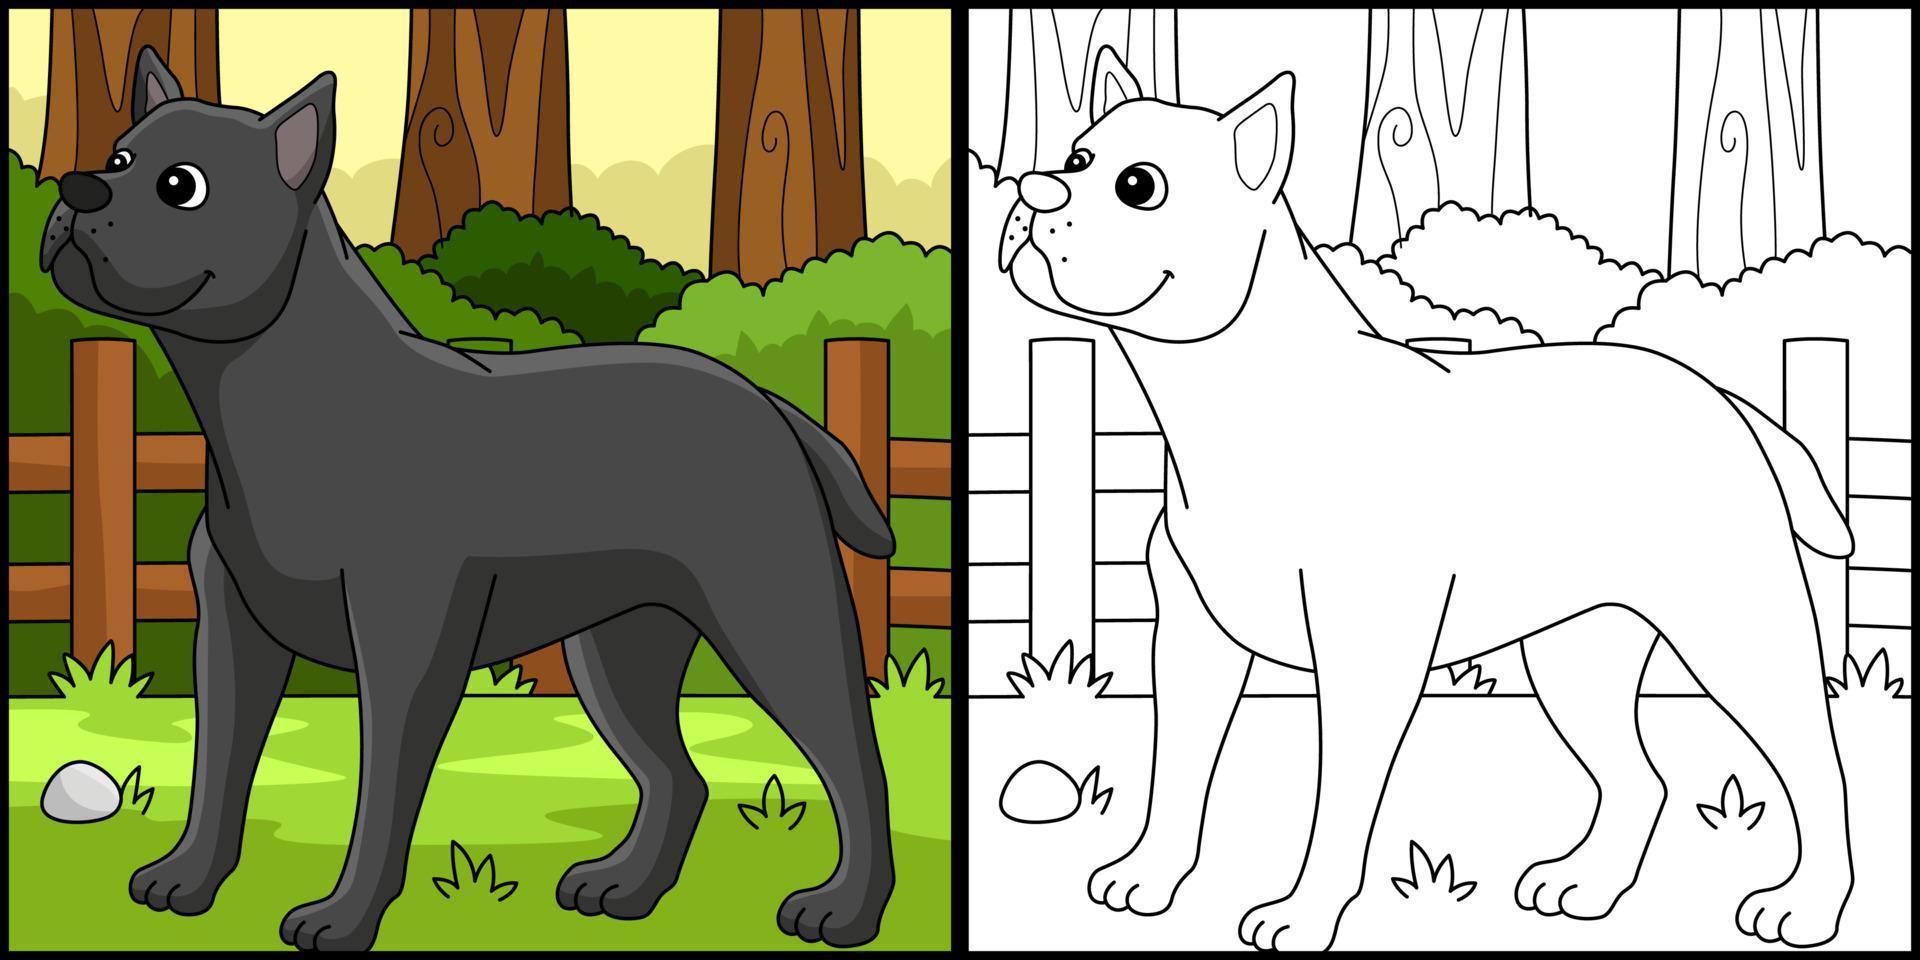 Cane Corso Dog Coloring Page Colored Illustration vector